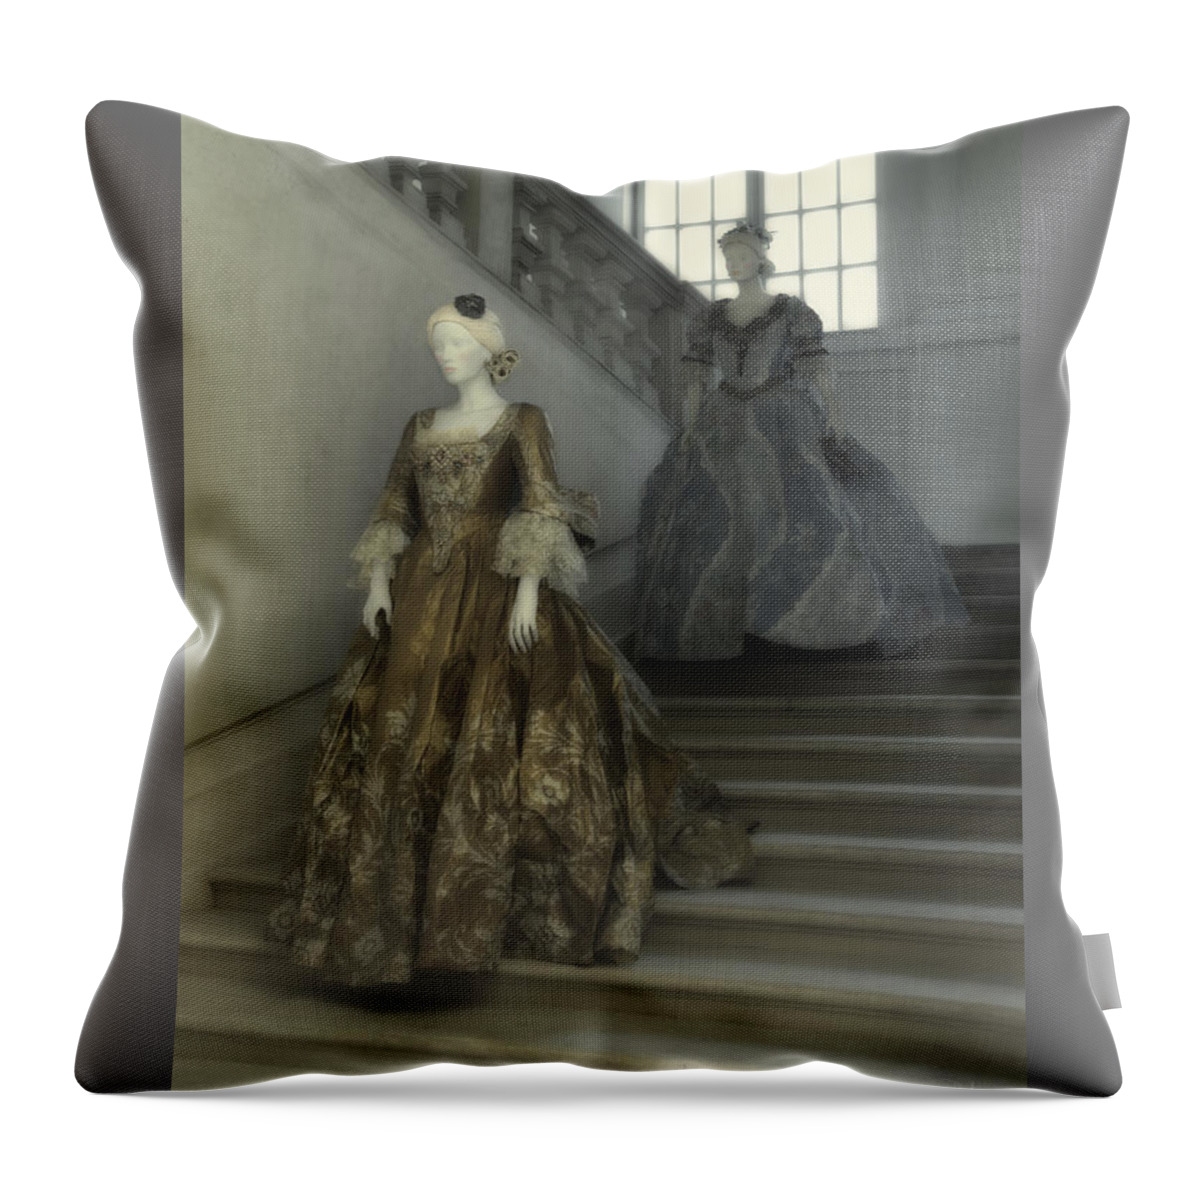 2015 Throw Pillow featuring the photograph Ghosts by Raffaella Lunelli